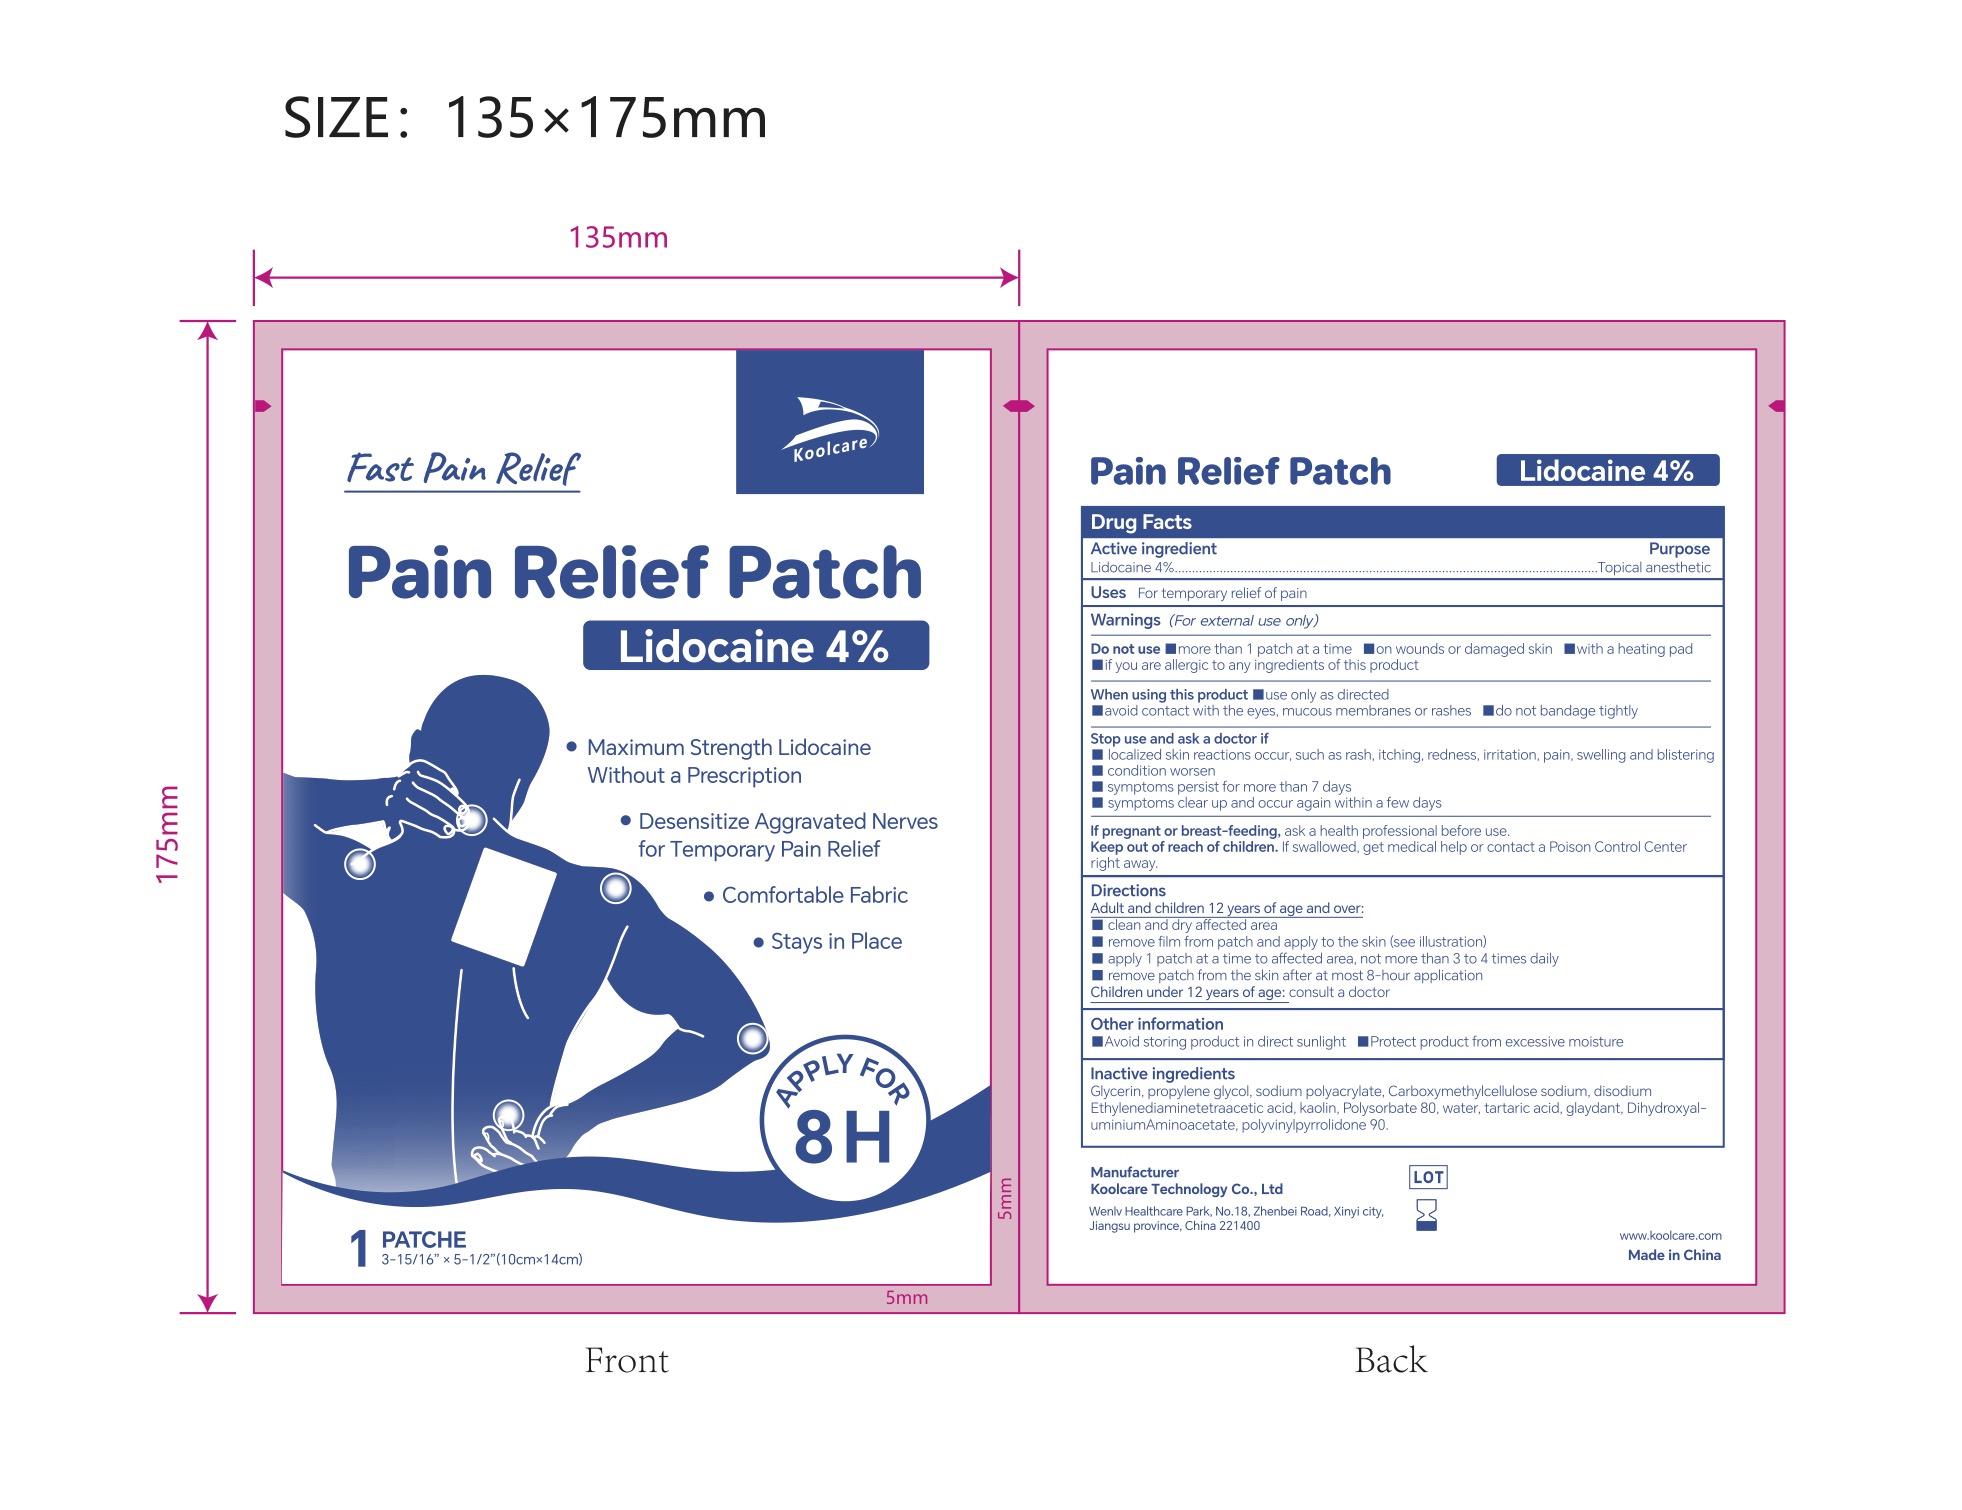 4% Lidocaine Pain Relief Patch NDC: <a href=/NDC/84205-002-00>84205-002-00</a>